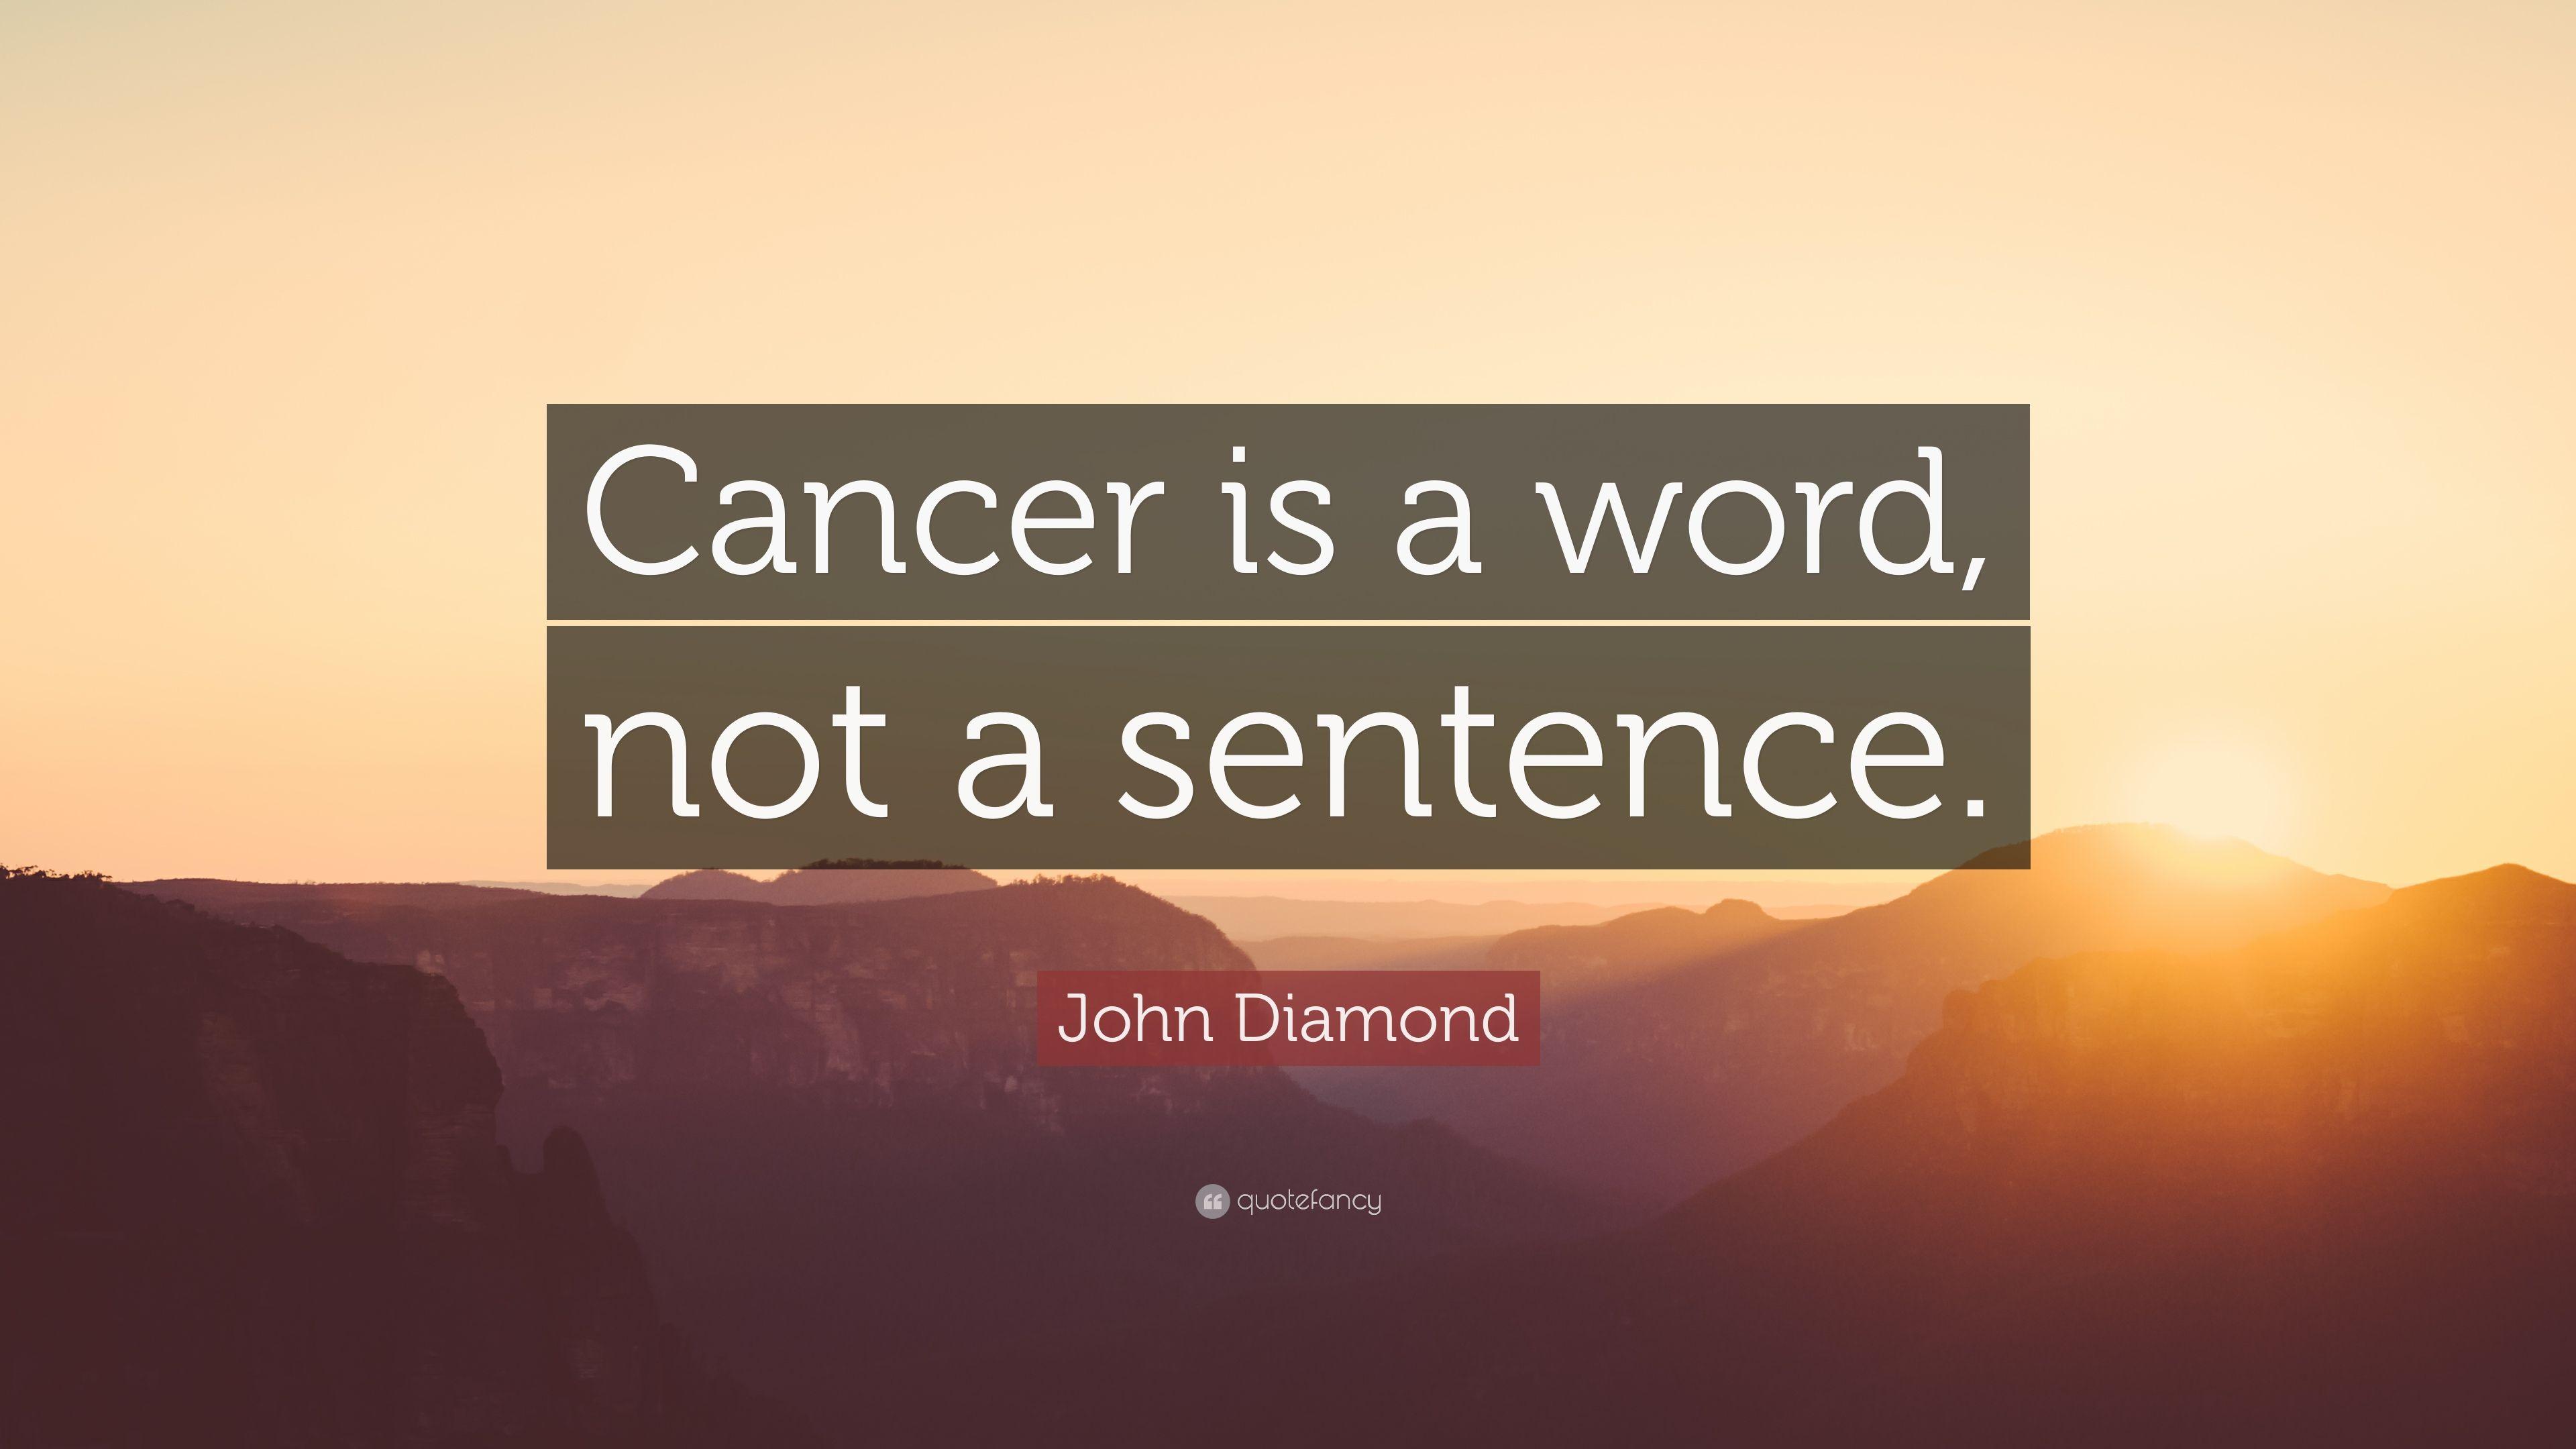 John Diamond Quote: “Cancer is a word, not a sentence.” 9